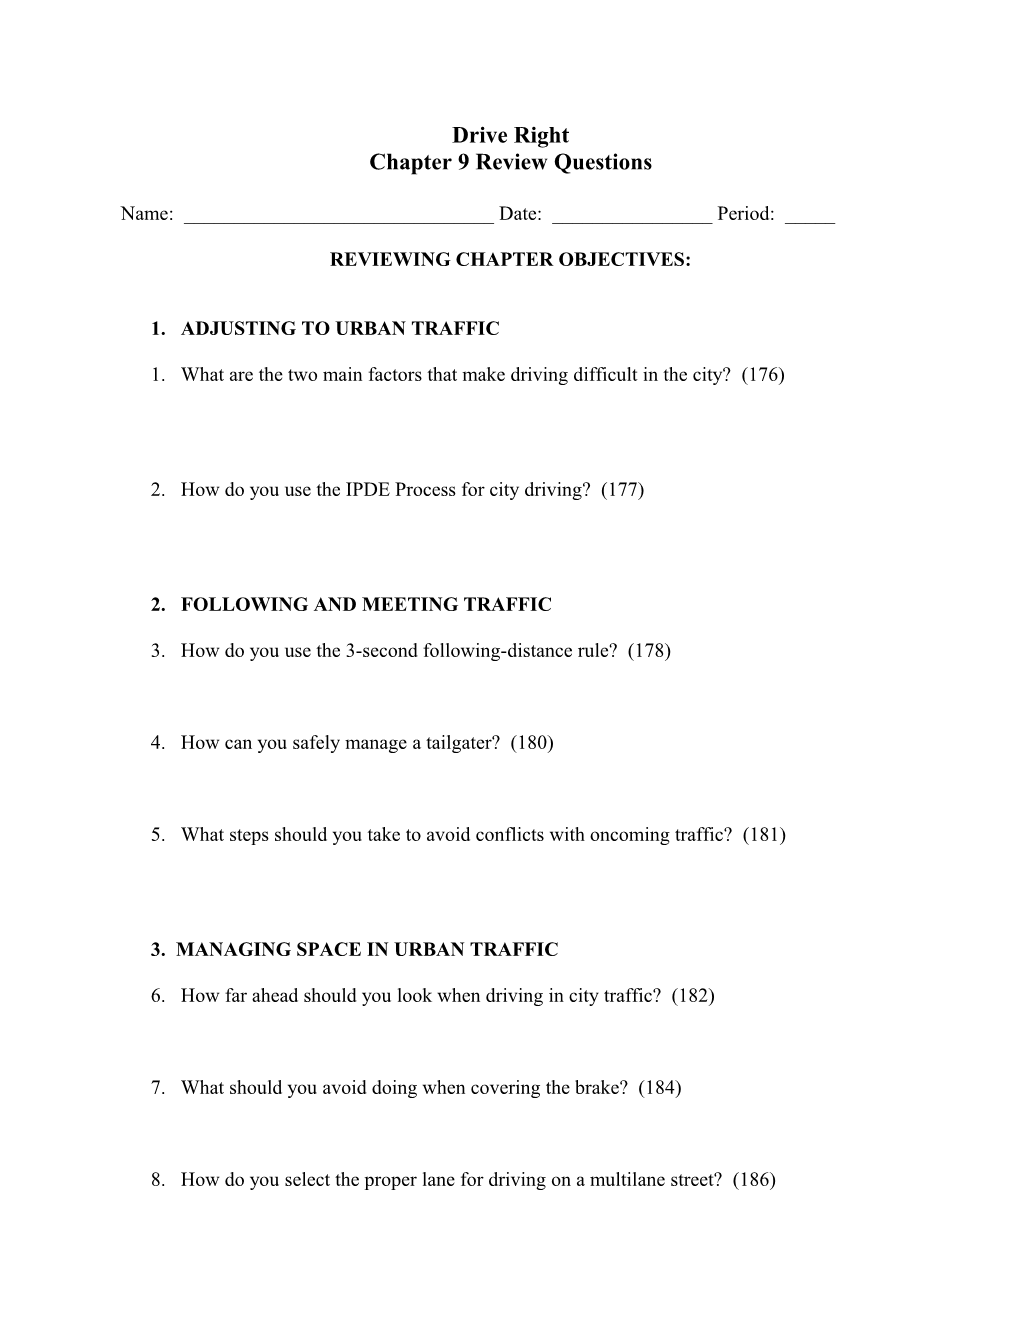 Chapter 9 Review Questions